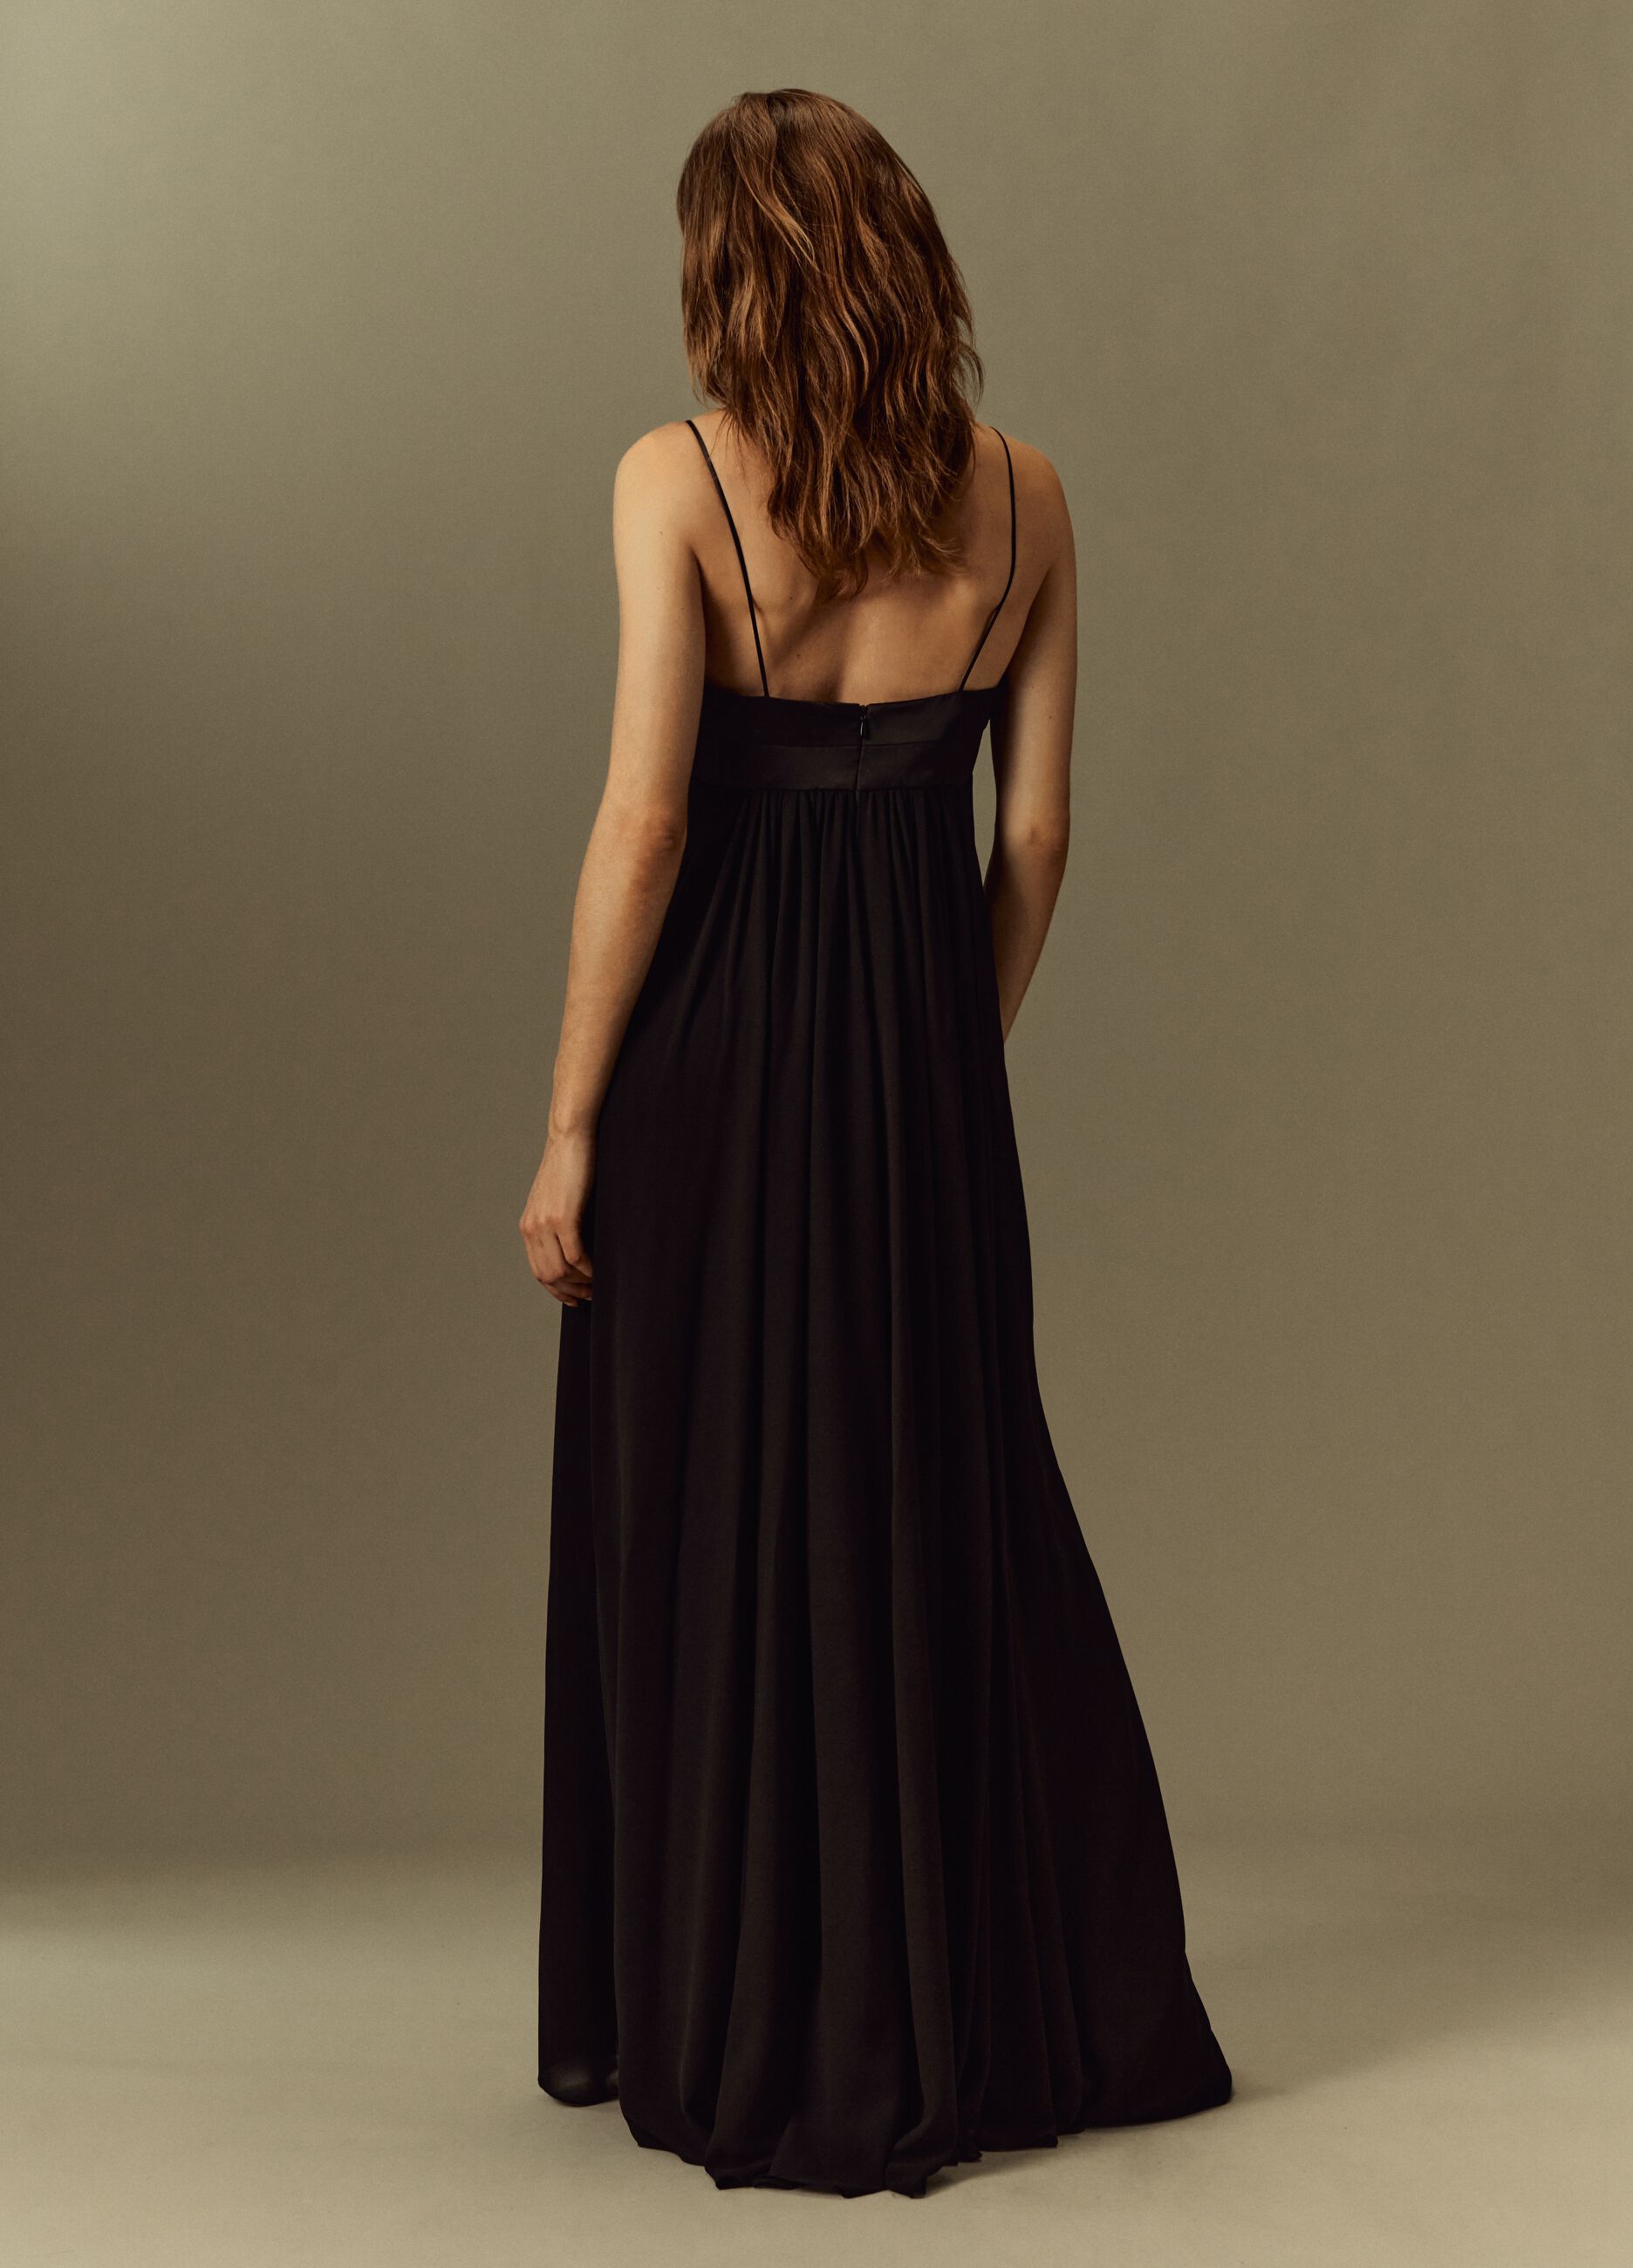 Long dress with spaghetti straps.